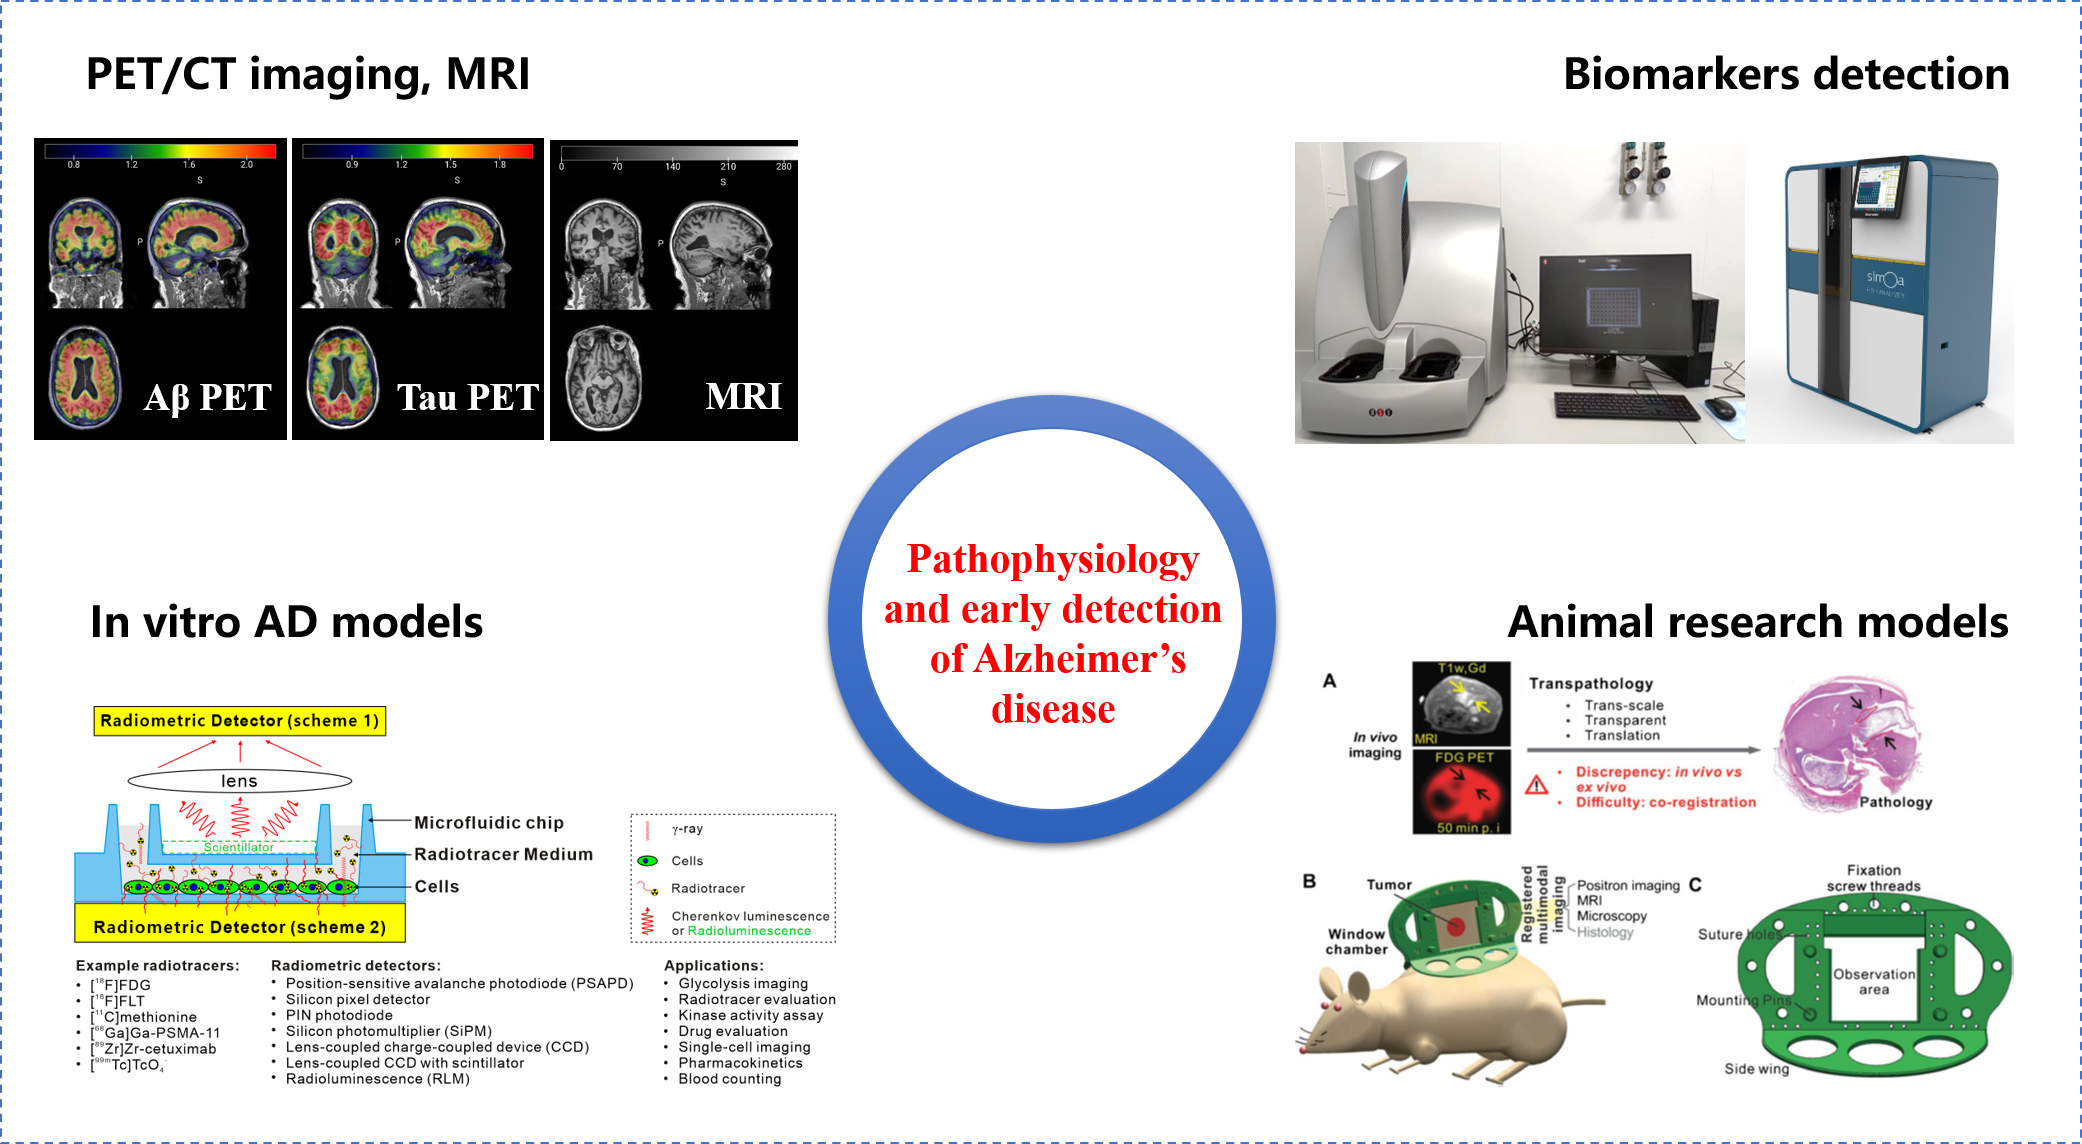 Pathophysiology characterization and early detection of Alzheimer's disease